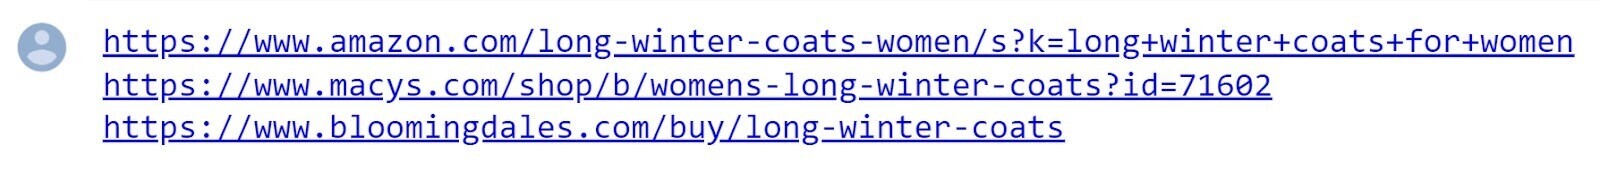 top three Google search results for the query "long winter coat" in the notebook